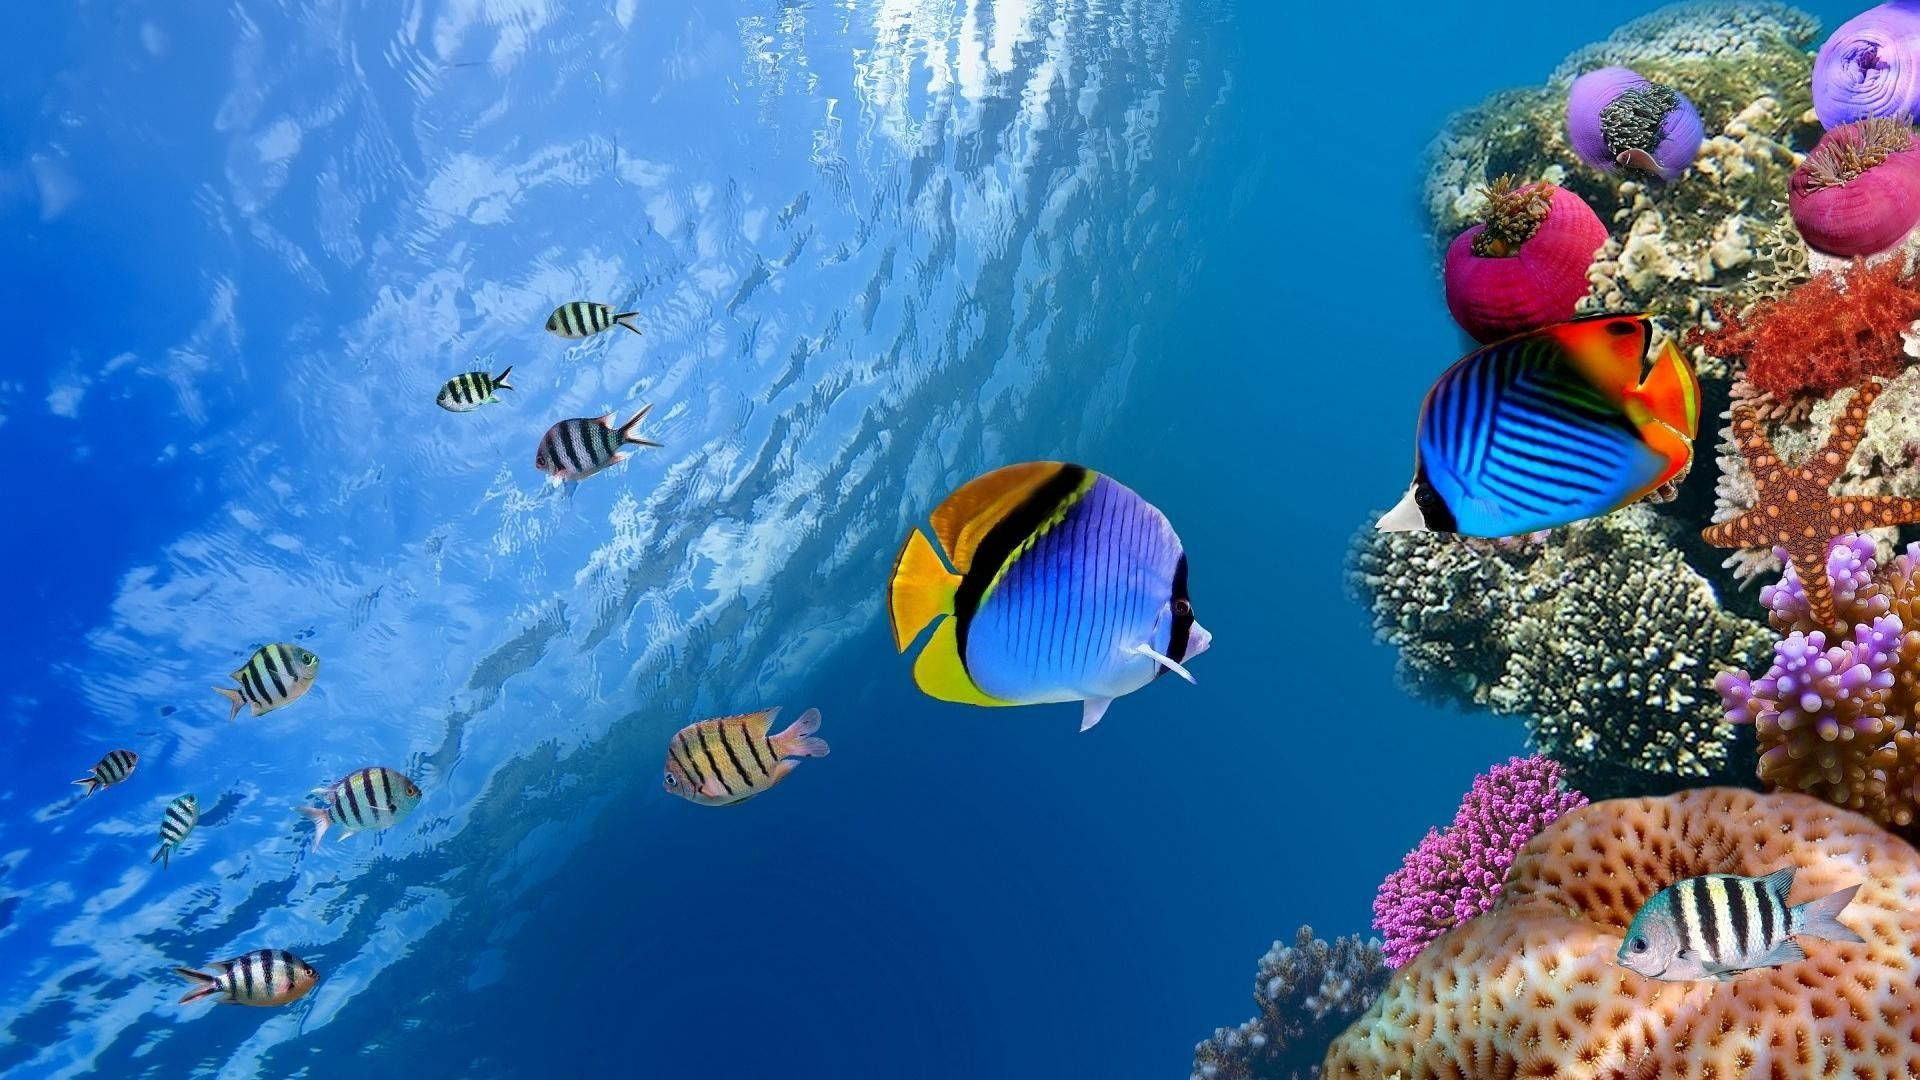 Tropical Fish In The Sea